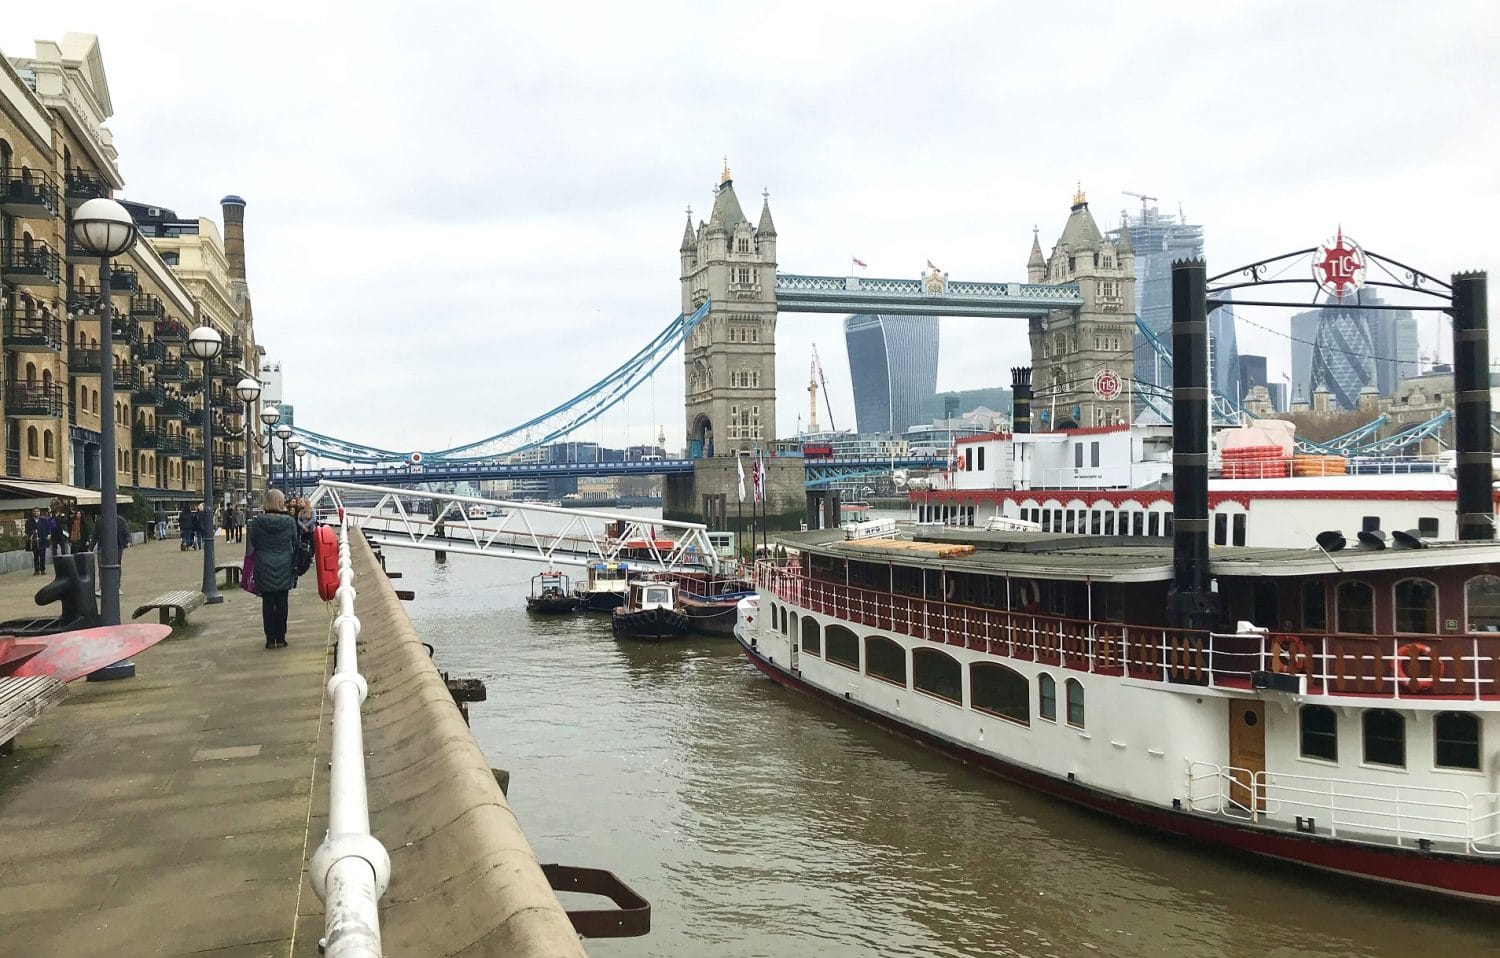 Explore London while you learn English